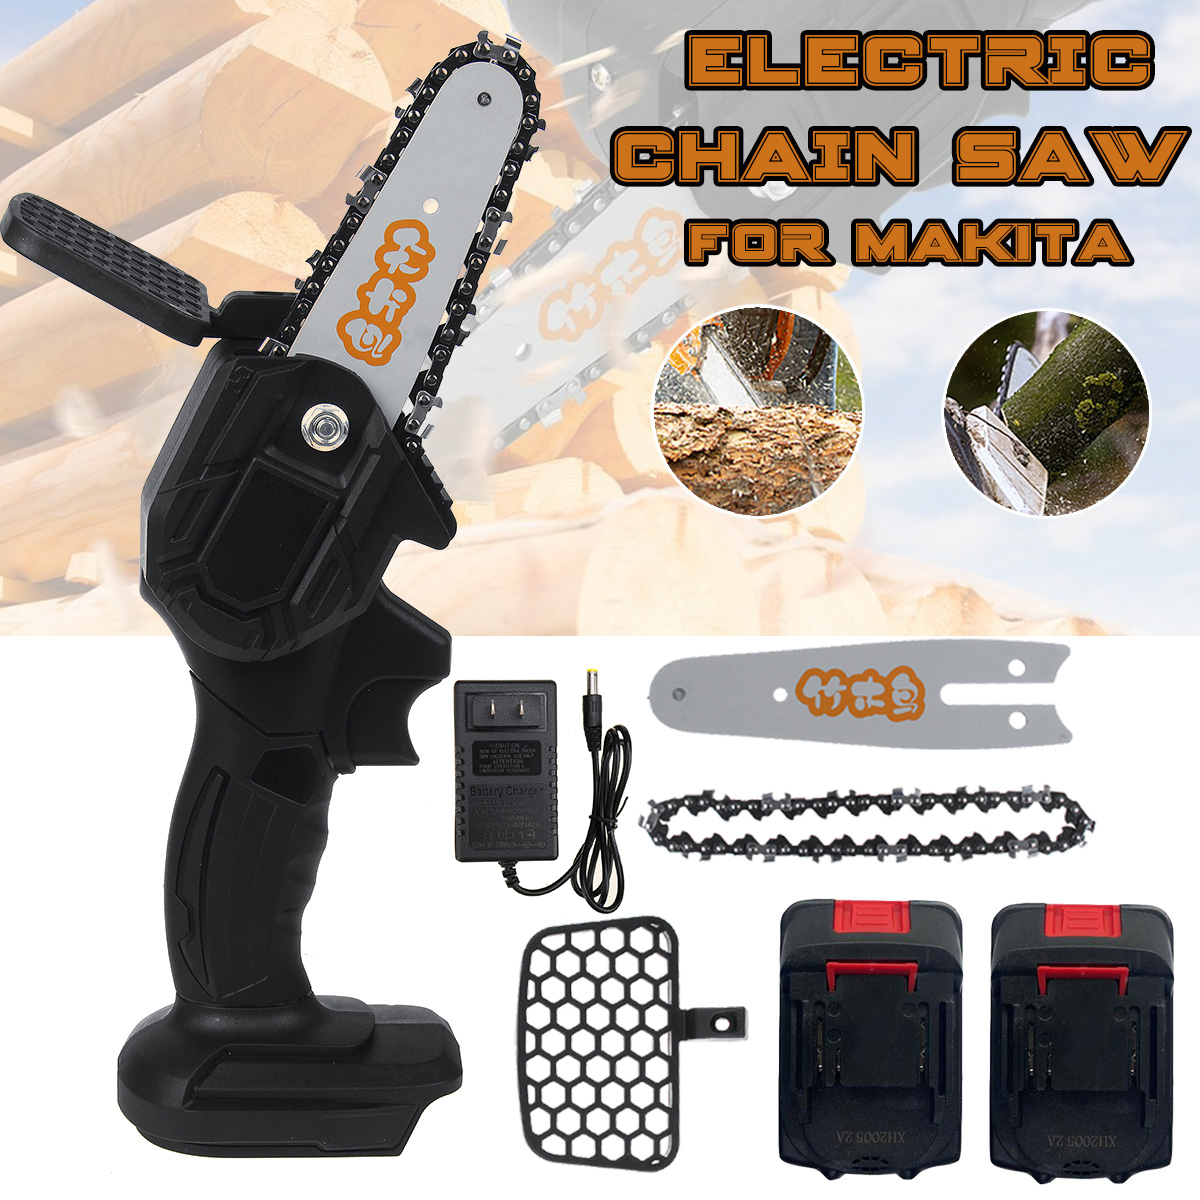 24V-Cordless-Electric-Chainsaw-4-Inch-Portable-Chain-Saw-Woodworking-Cutting-Tool-W-2pcs-Battery-1784404-1